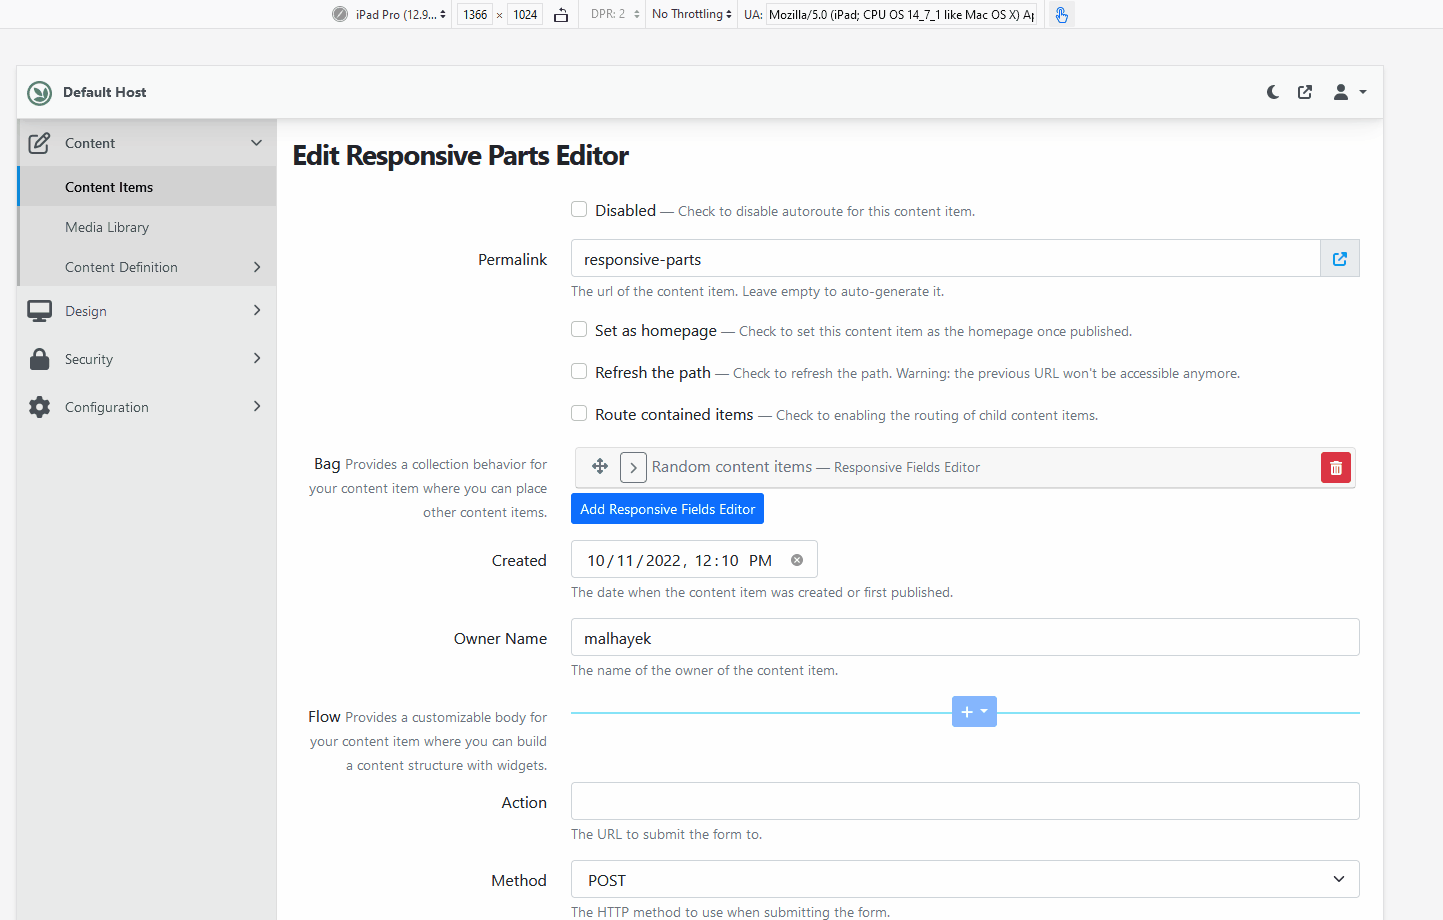 Responsive editors for the Content Parts